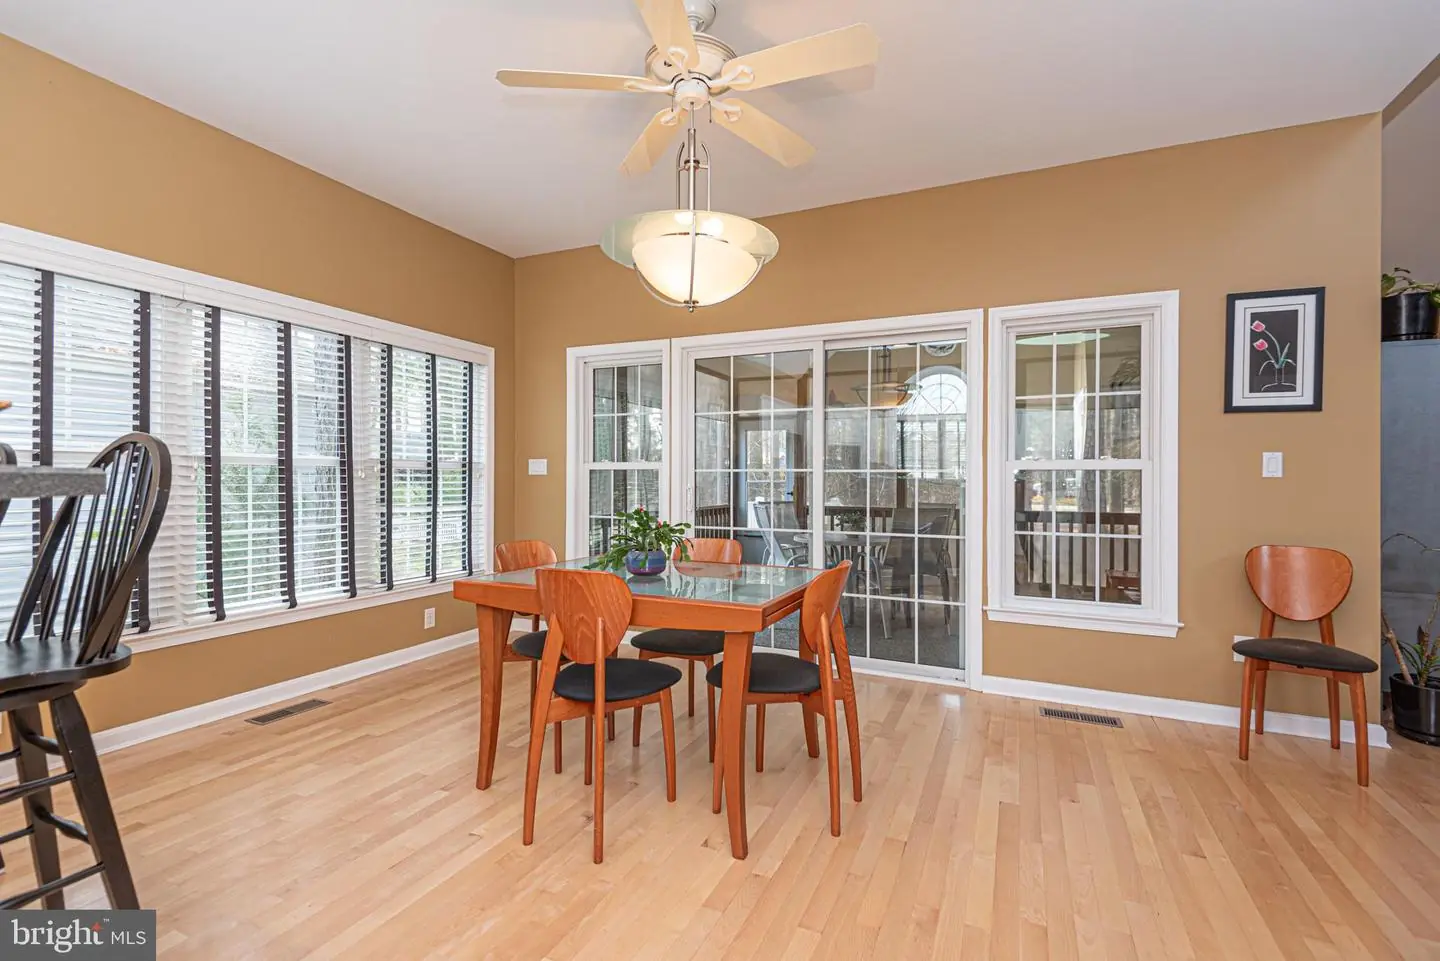 MDWO2019426-802903995188-2024-03-08-00-14-50 106 Pine Forest Dr | Berlin, MD Real Estate For Sale | MLS# Mdwo2019426  - 1st Choice Properties